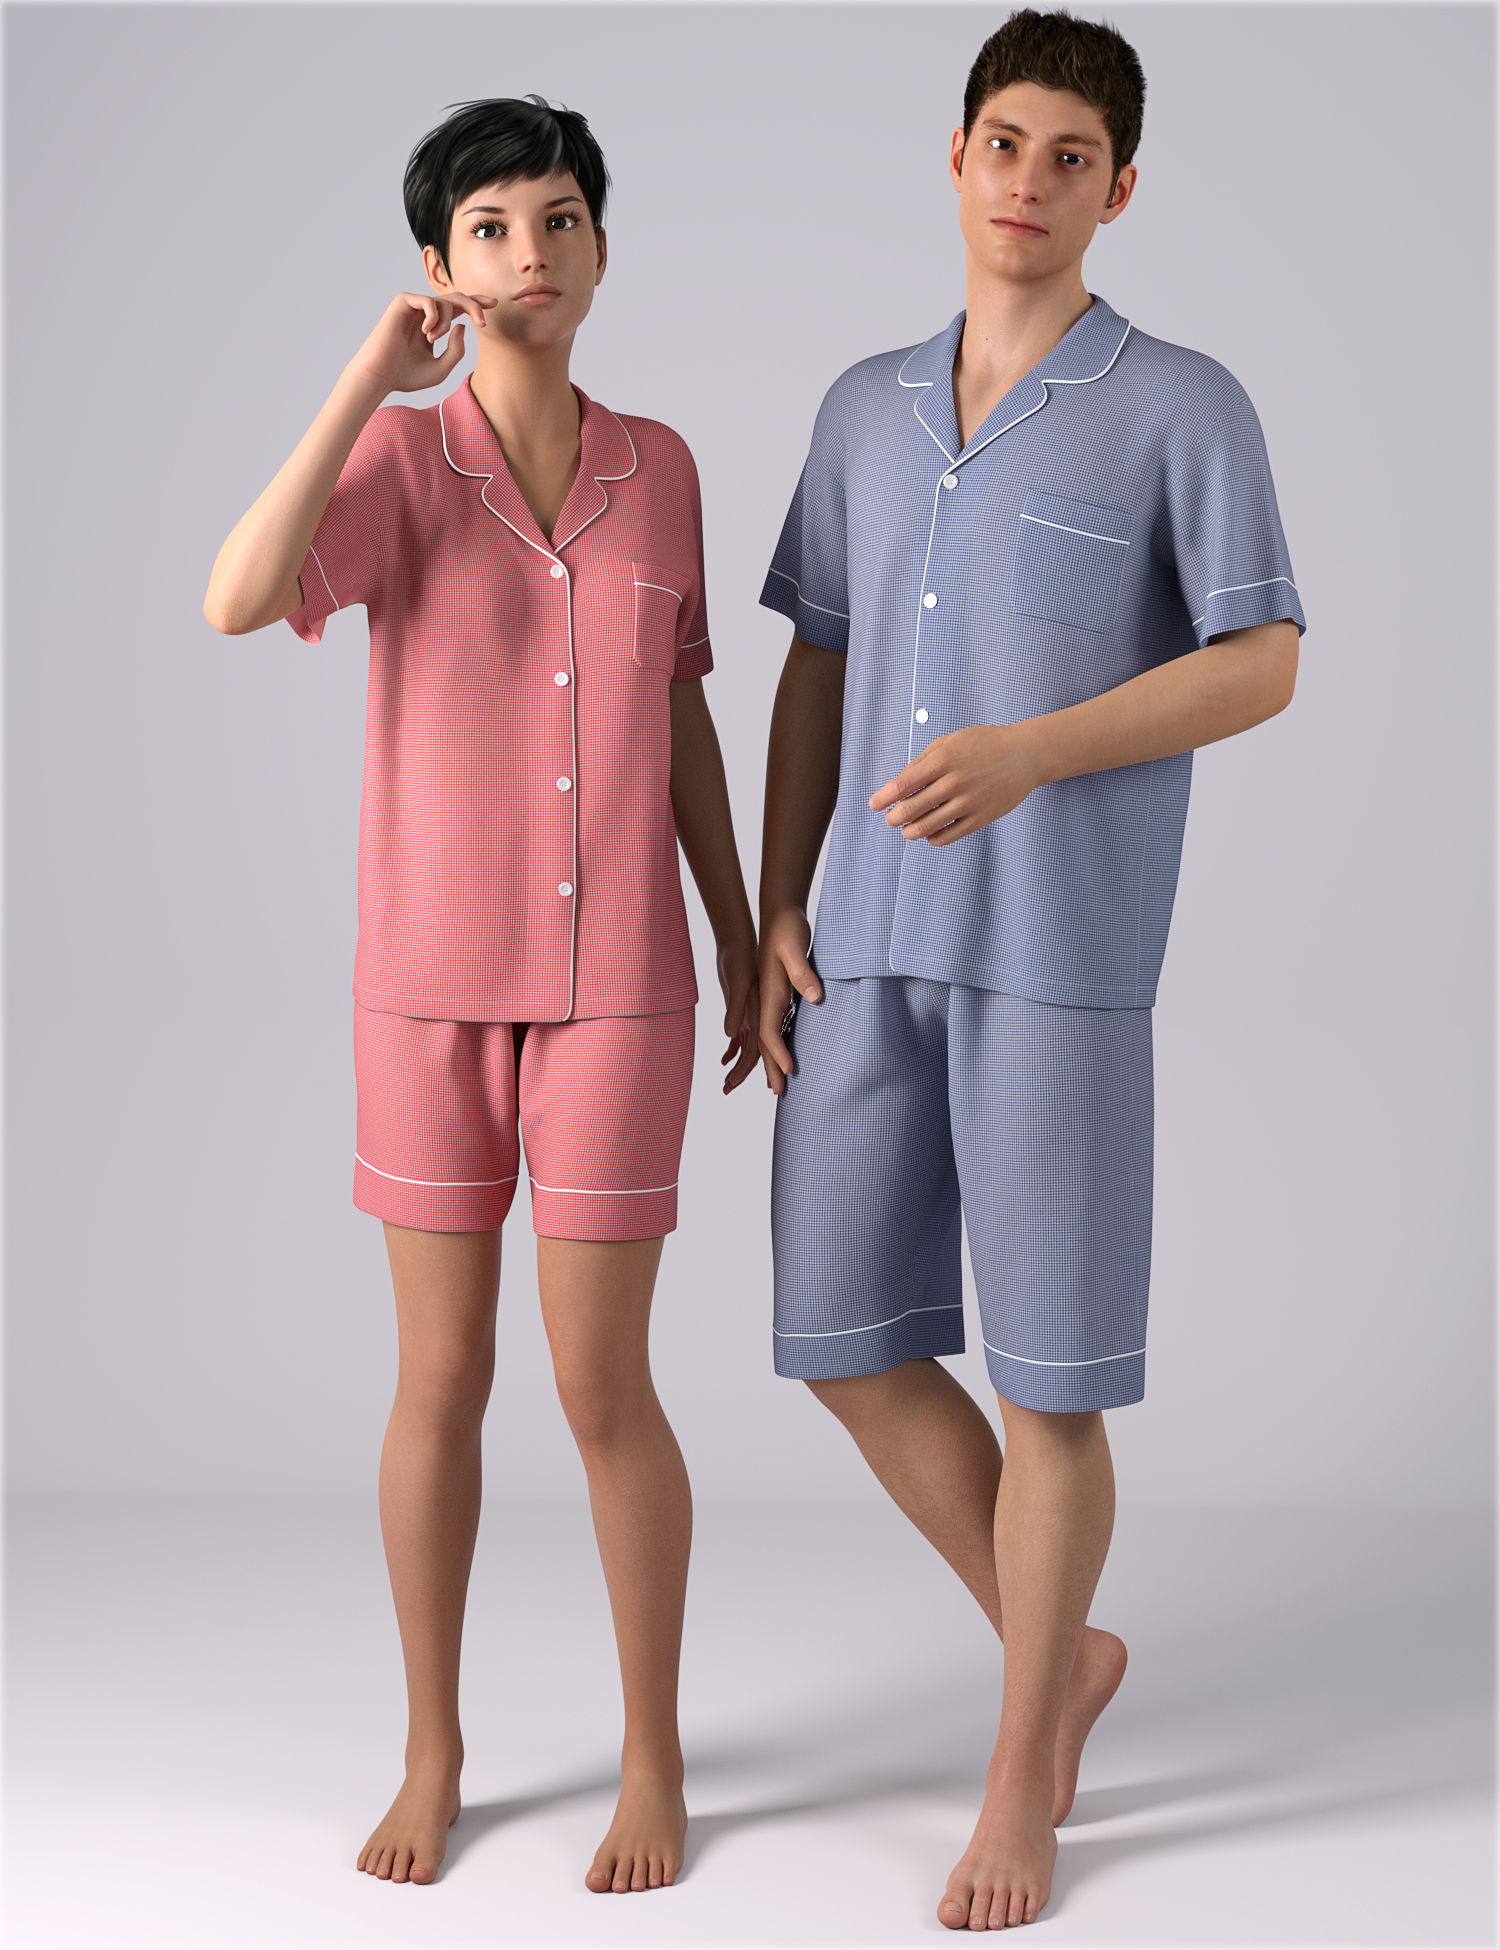 dForce HnC Summer Pajamas Outfits for Genesis 8.1 Females and Males by: IH Kang, 3D Models by Daz 3D